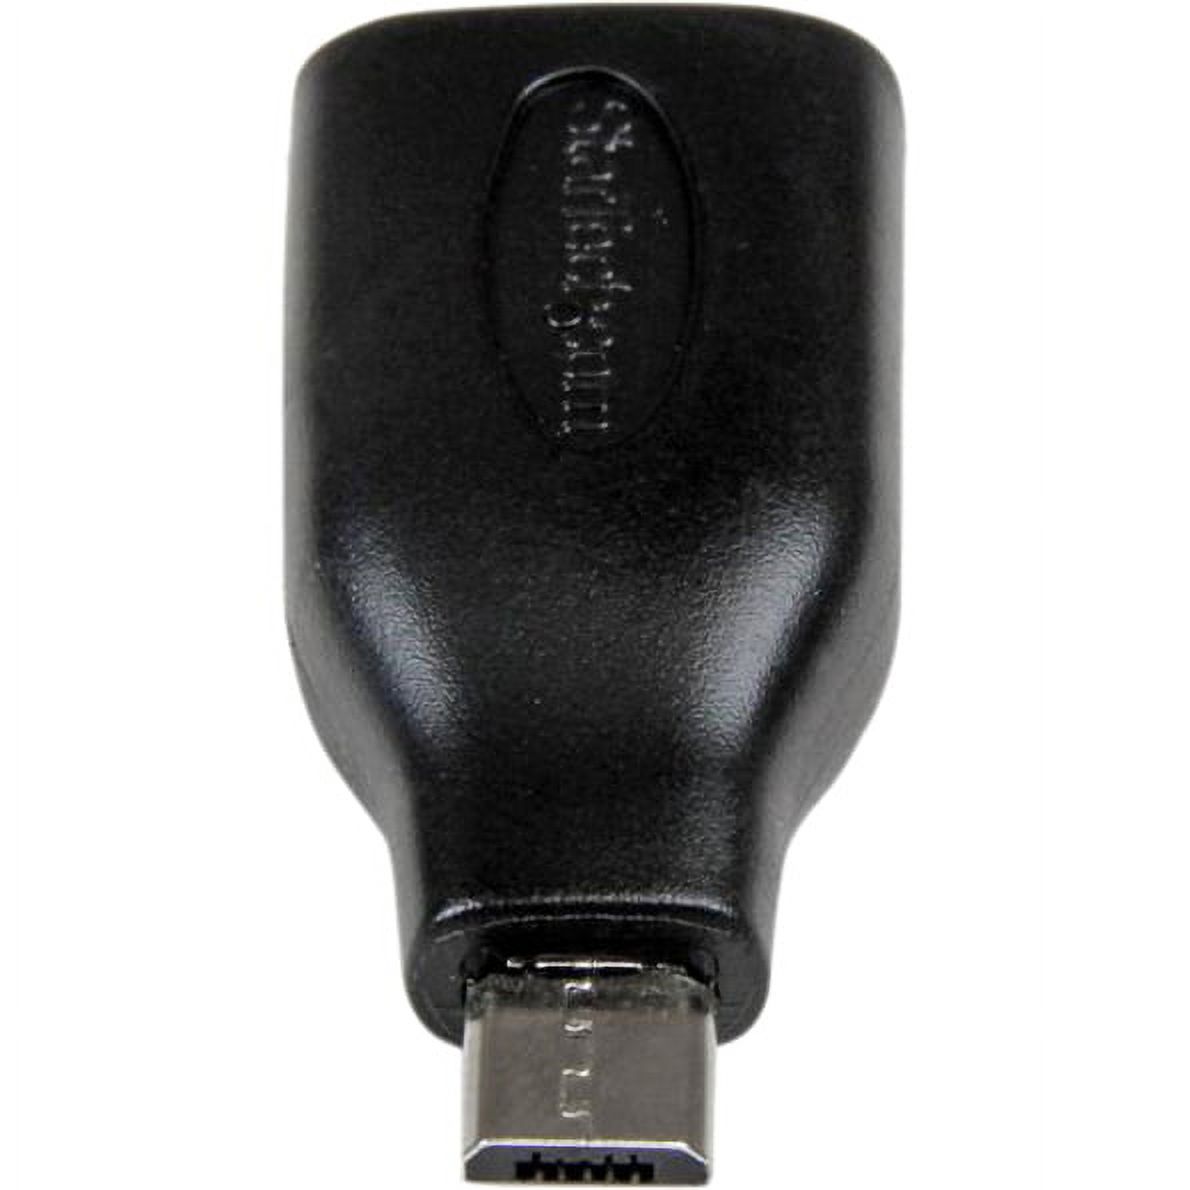 StarTech.com Micro USB OTG (On the Go) to USB Adapter - M/F - image 2 of 3